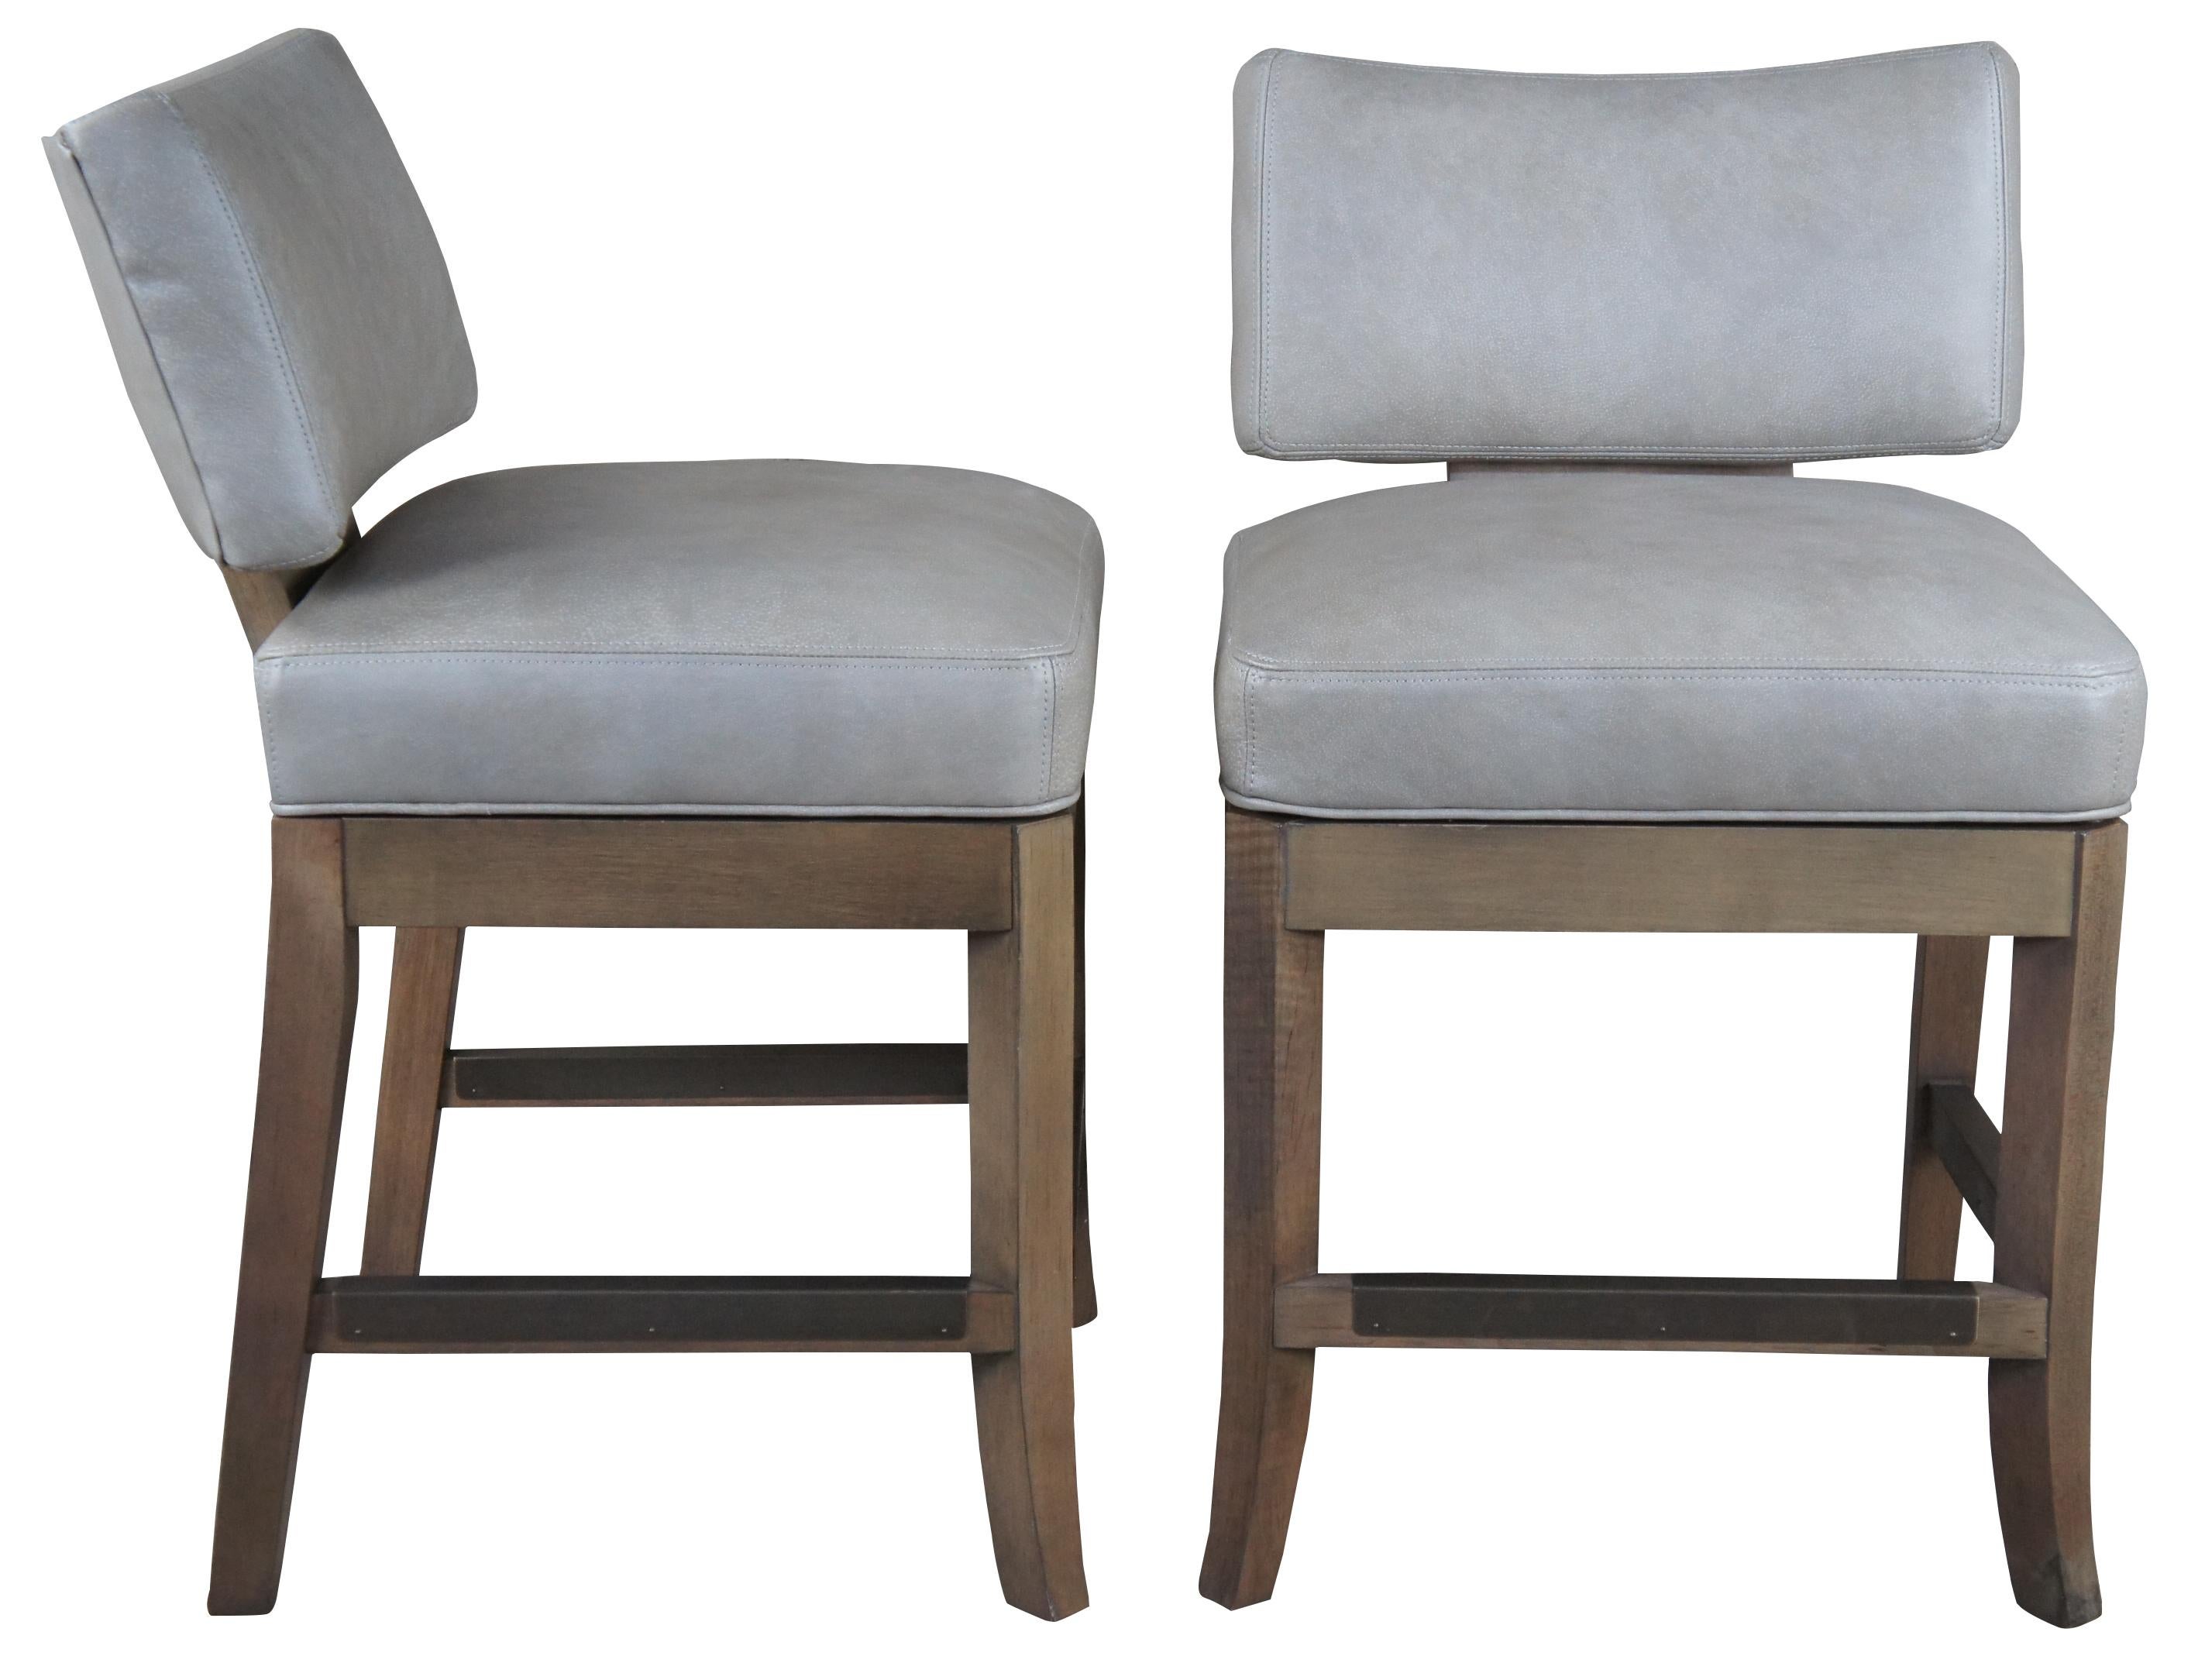 Two vintage McKinley of Hickory Inc Barstools featuring gray bovine leather upholstery with swivel action and metal foot guards.

The McDowell swivel barstool is a handsome addition to any decor. Suitable in a contract, hospitality or residential